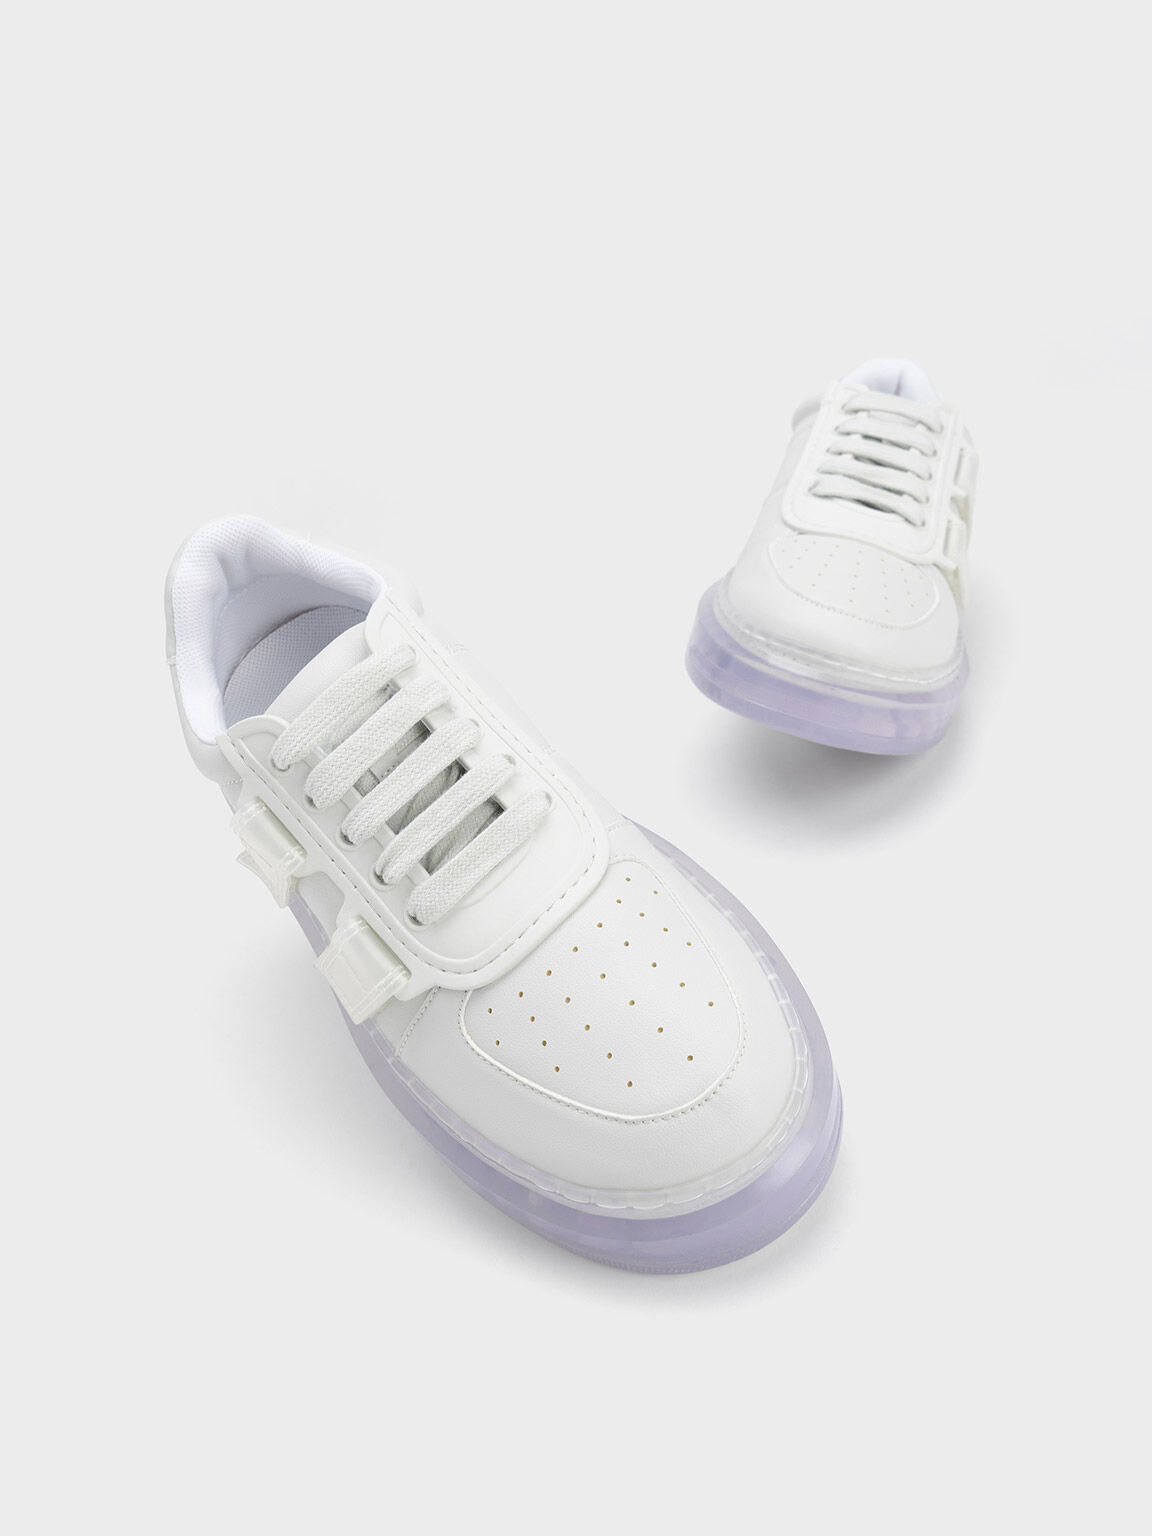 Translucent Coloured Sole Low-Top Sneakers, Purple, hi-res